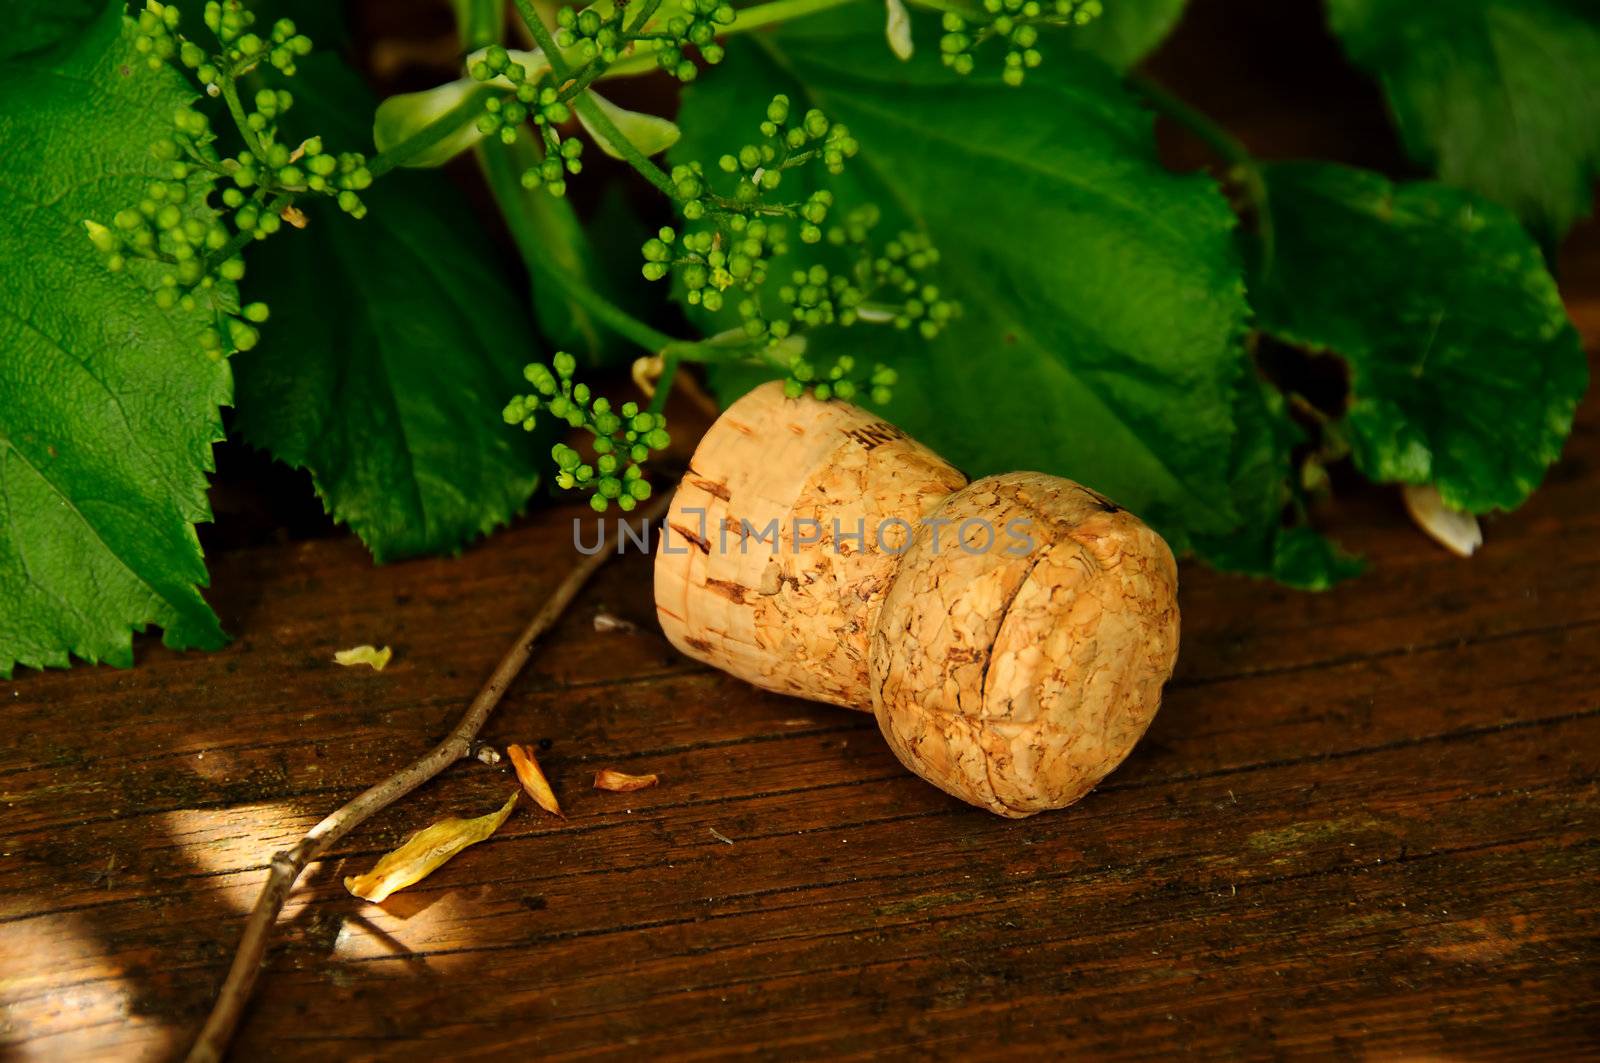 The garden party is over, a champagne cork is lying on the patio floor